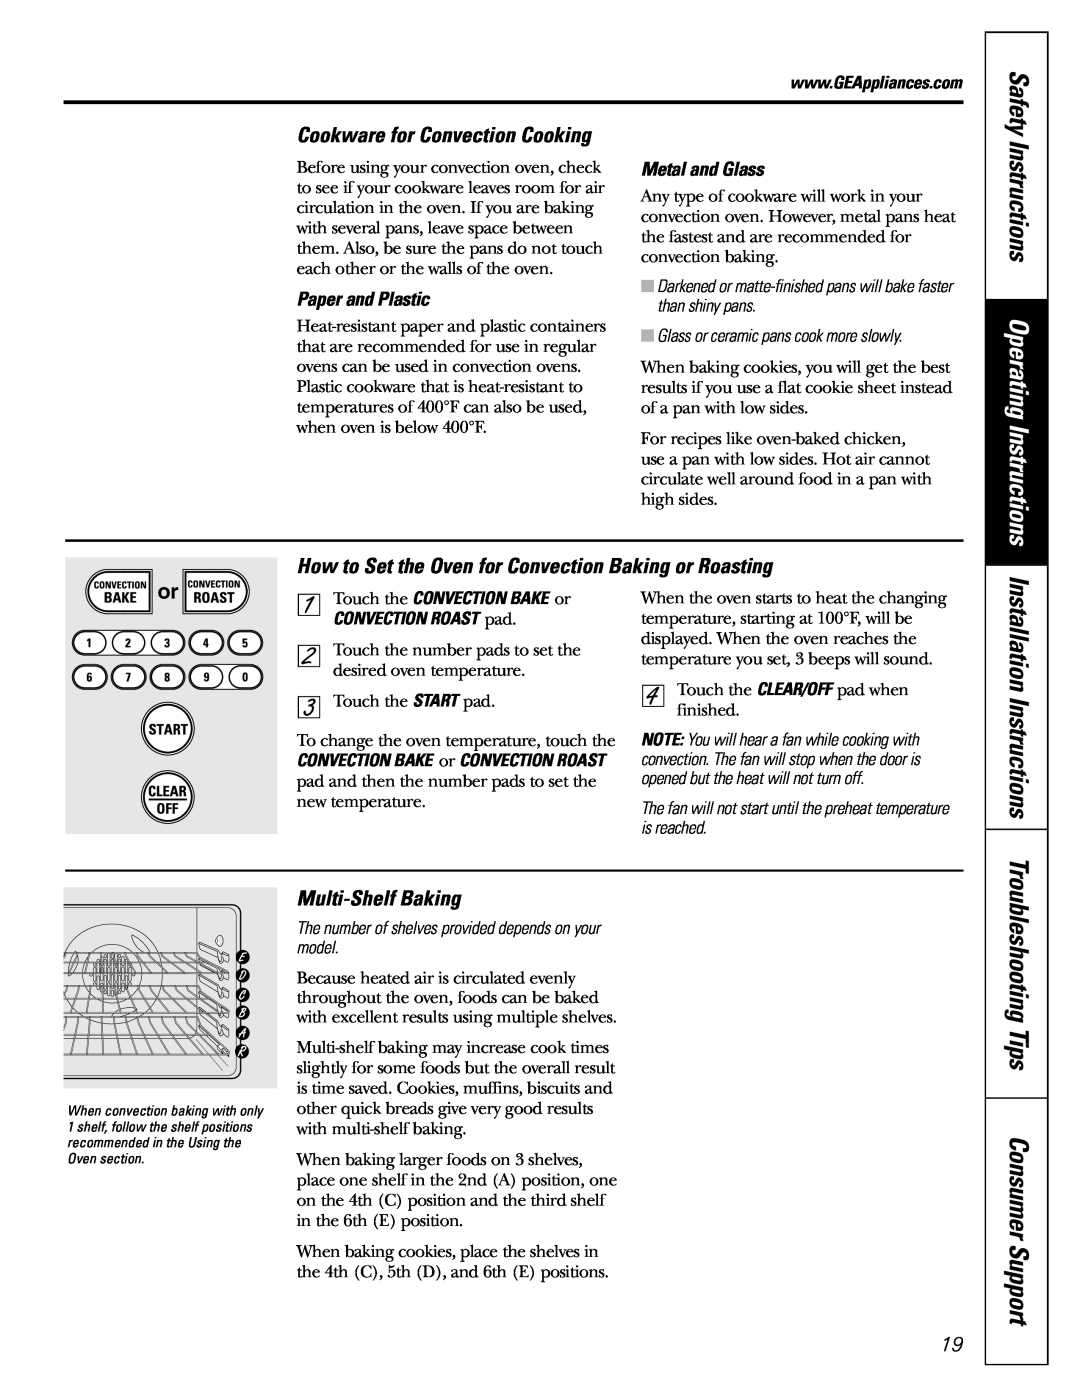 GE JGB915 Installation Instructions, Instructions Operating Instructions, Troubleshooting Tips Consumer Support, Safety 